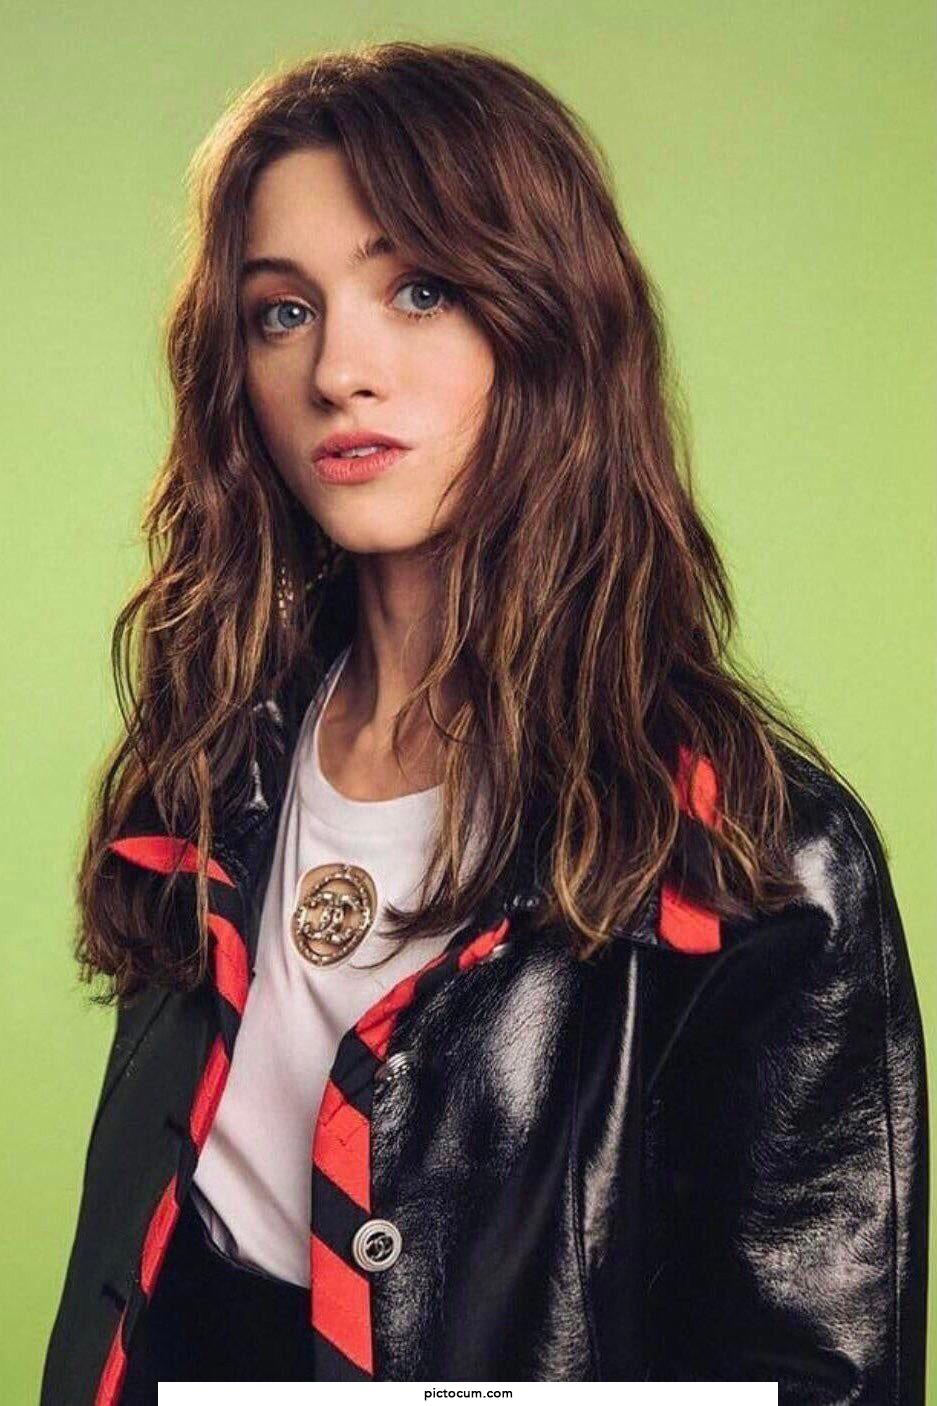 I love stroking with a bud to my queen Natalia Dyer. Join me